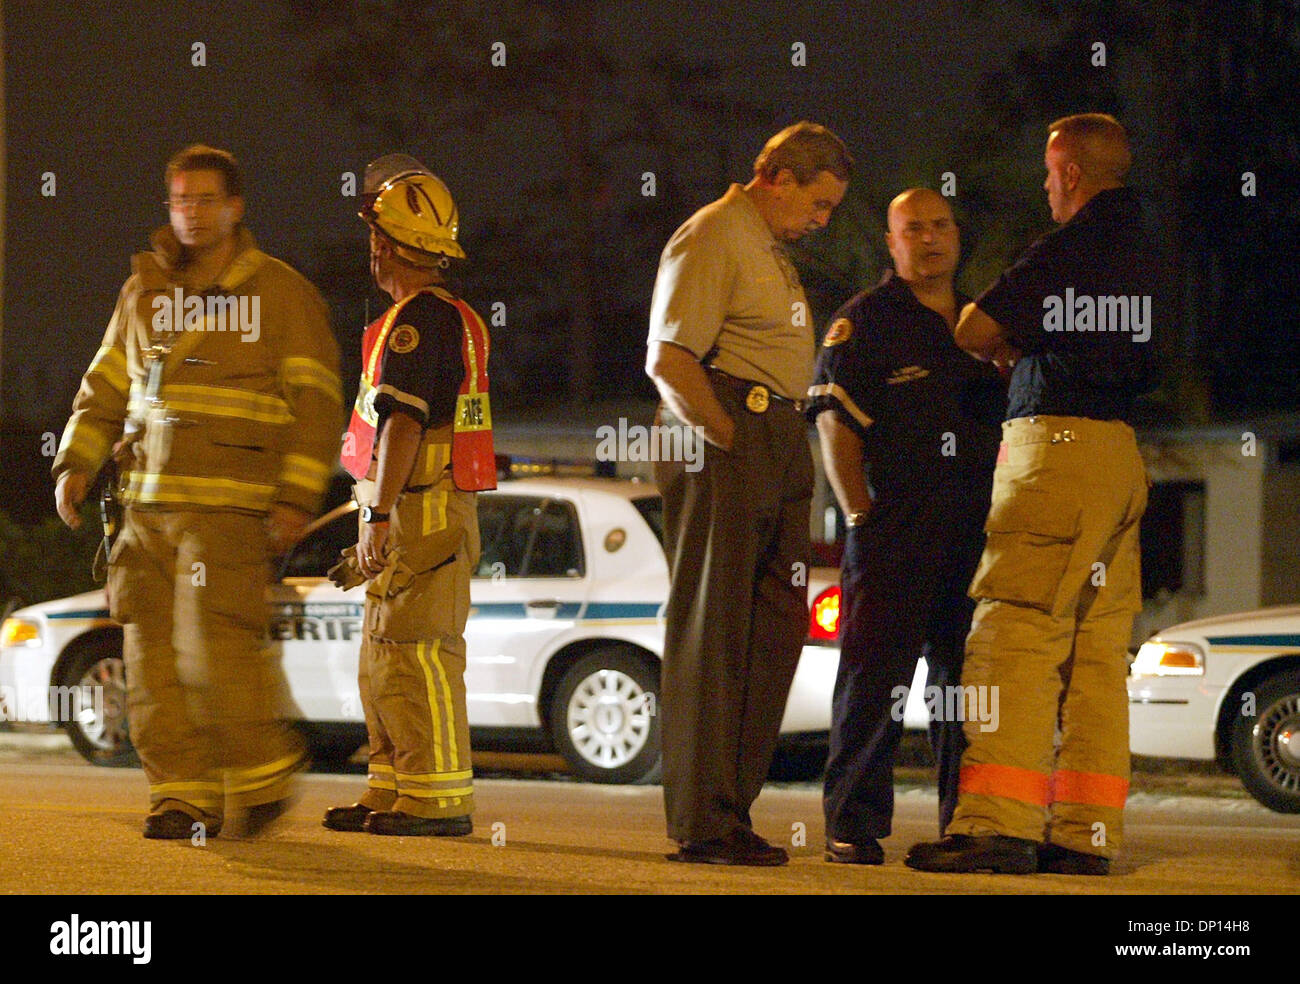 Apr 18, 2006; Boynton Beach, FL, USA; Palm Beach County Sheriff Ric Bradshaw, middle, and Fire-Rescue officials stand on Hypoluxo Blvd. just east of Jog Rd. waiting to set up a command post after a house on Hypoluxo Farms Rd. exploded Tuesday evening, April 18, 2006 in suburban Boynton Beach. Sheriff's Office personnel blocked off numerous side streets to keep bystanders back. The  Stock Photo